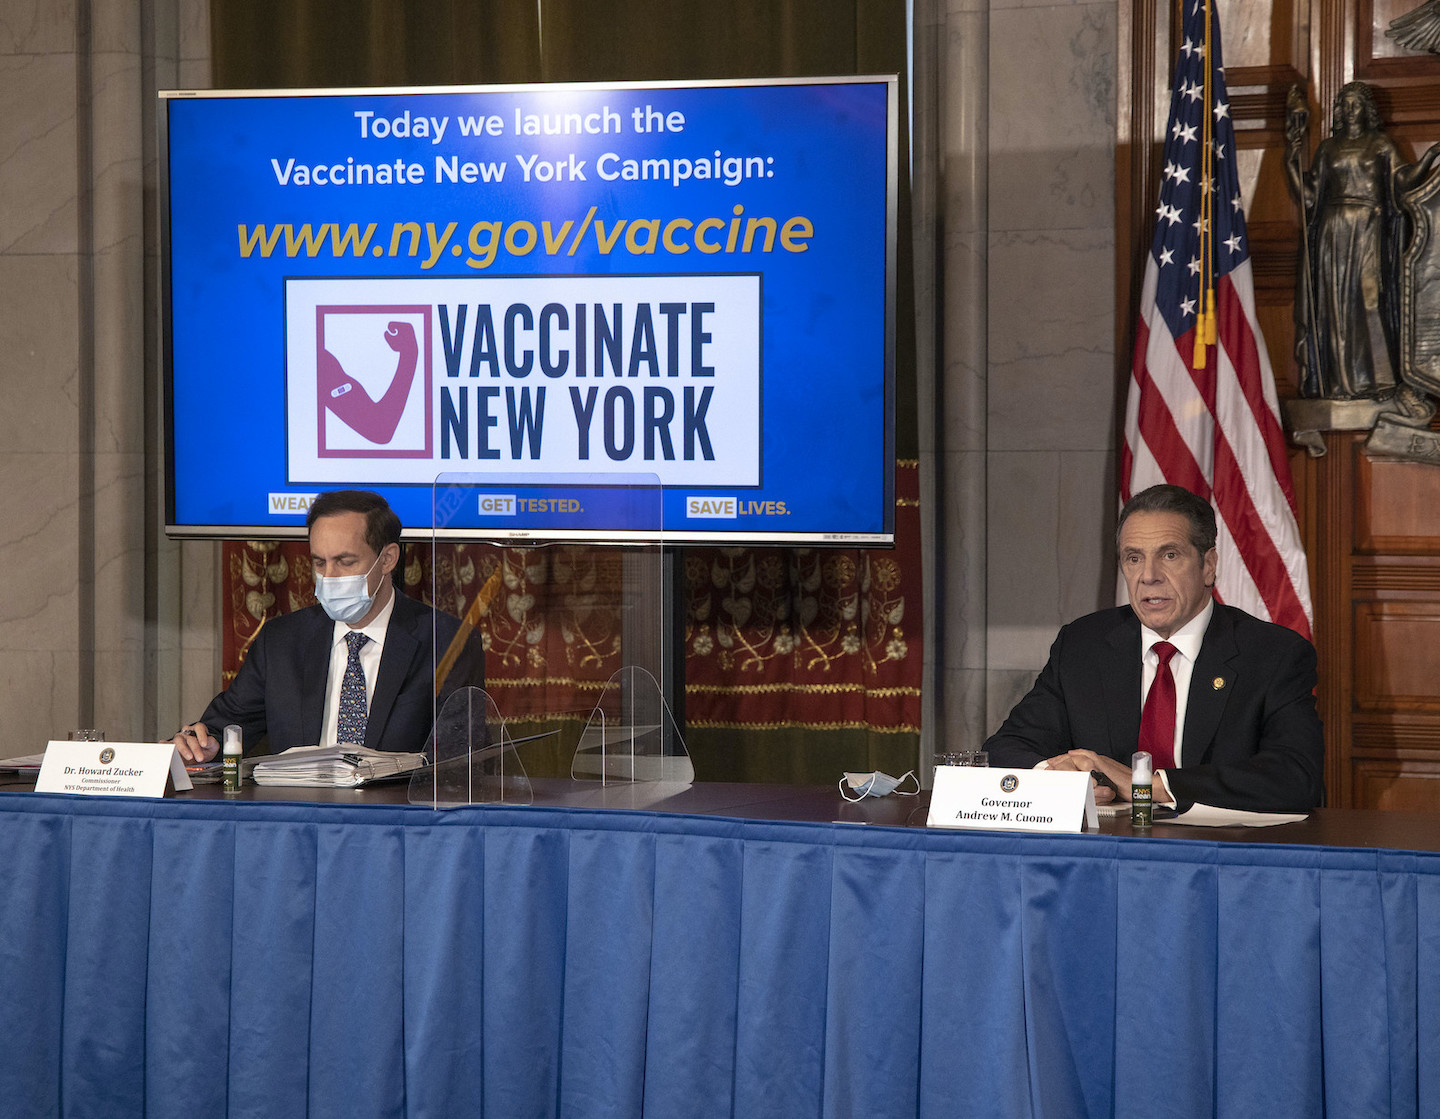 Gov. Andrew Cuomo provides a coronavirus update from the Red Room at the State Capitol. To his right is New York State Health Commissioner Howard Zucker. (Photo by Mike Groll/Office of Gov. Andrew M. Cuomo)